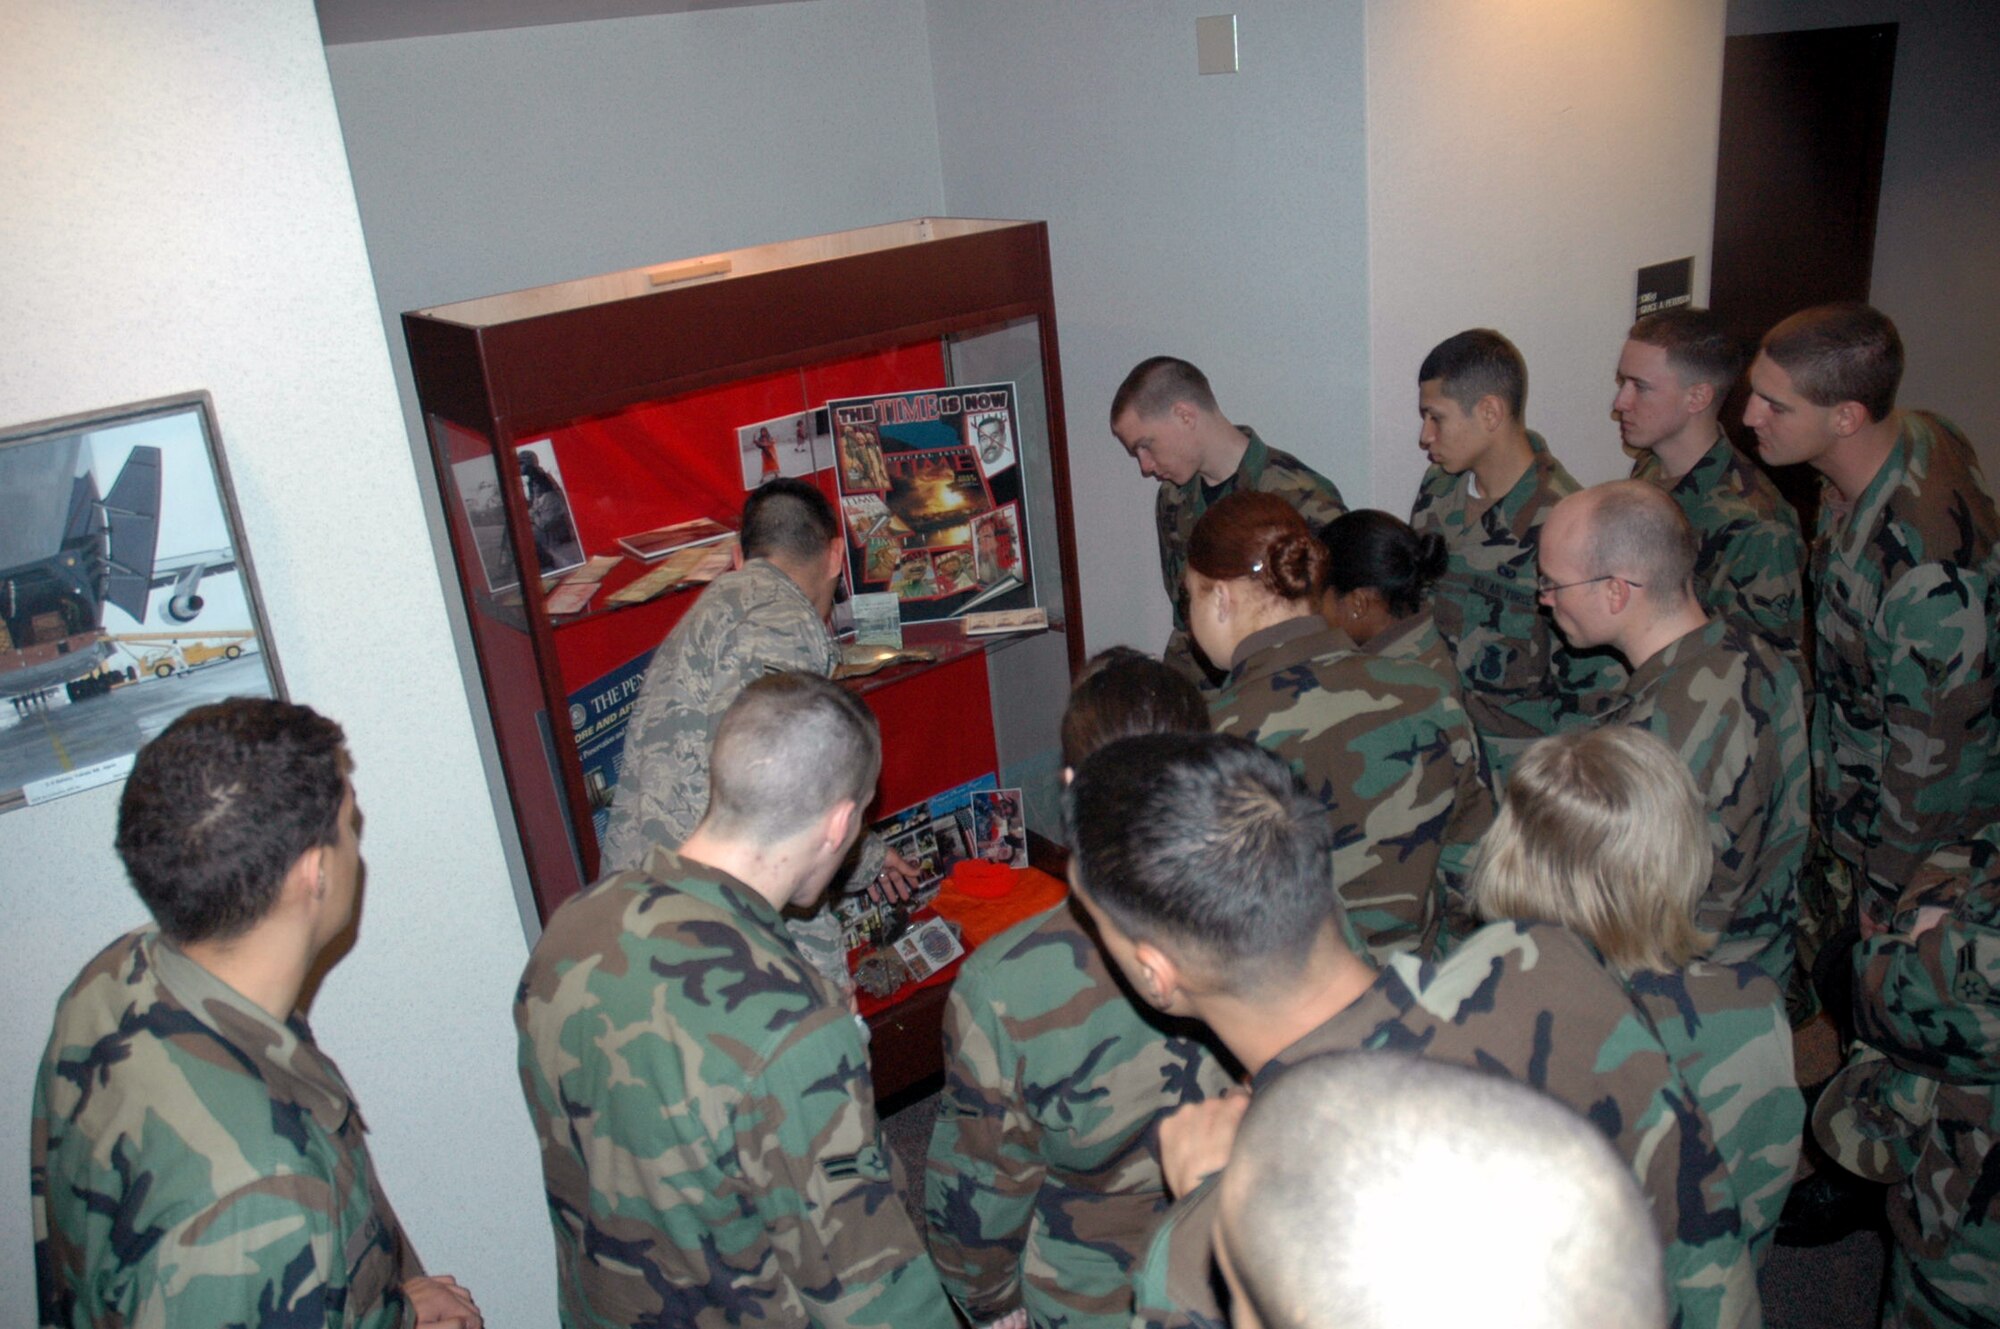 Airman 1st Class Zach Palafax, U.S. Air Force Expeditionary Center Resources Directorate, shows students from the McGuire Air Force Base, N.J., First Term Airman Center the USAF EC's Sept. 11, 2001, memorial case Jan. 16, 2007, on Fort Dix, N.J.  The FTAC students toured the Center and learned more about its mission and people.  (U.S. Air Force Photo/Tech. Sgt. Scott T. Sturkol)